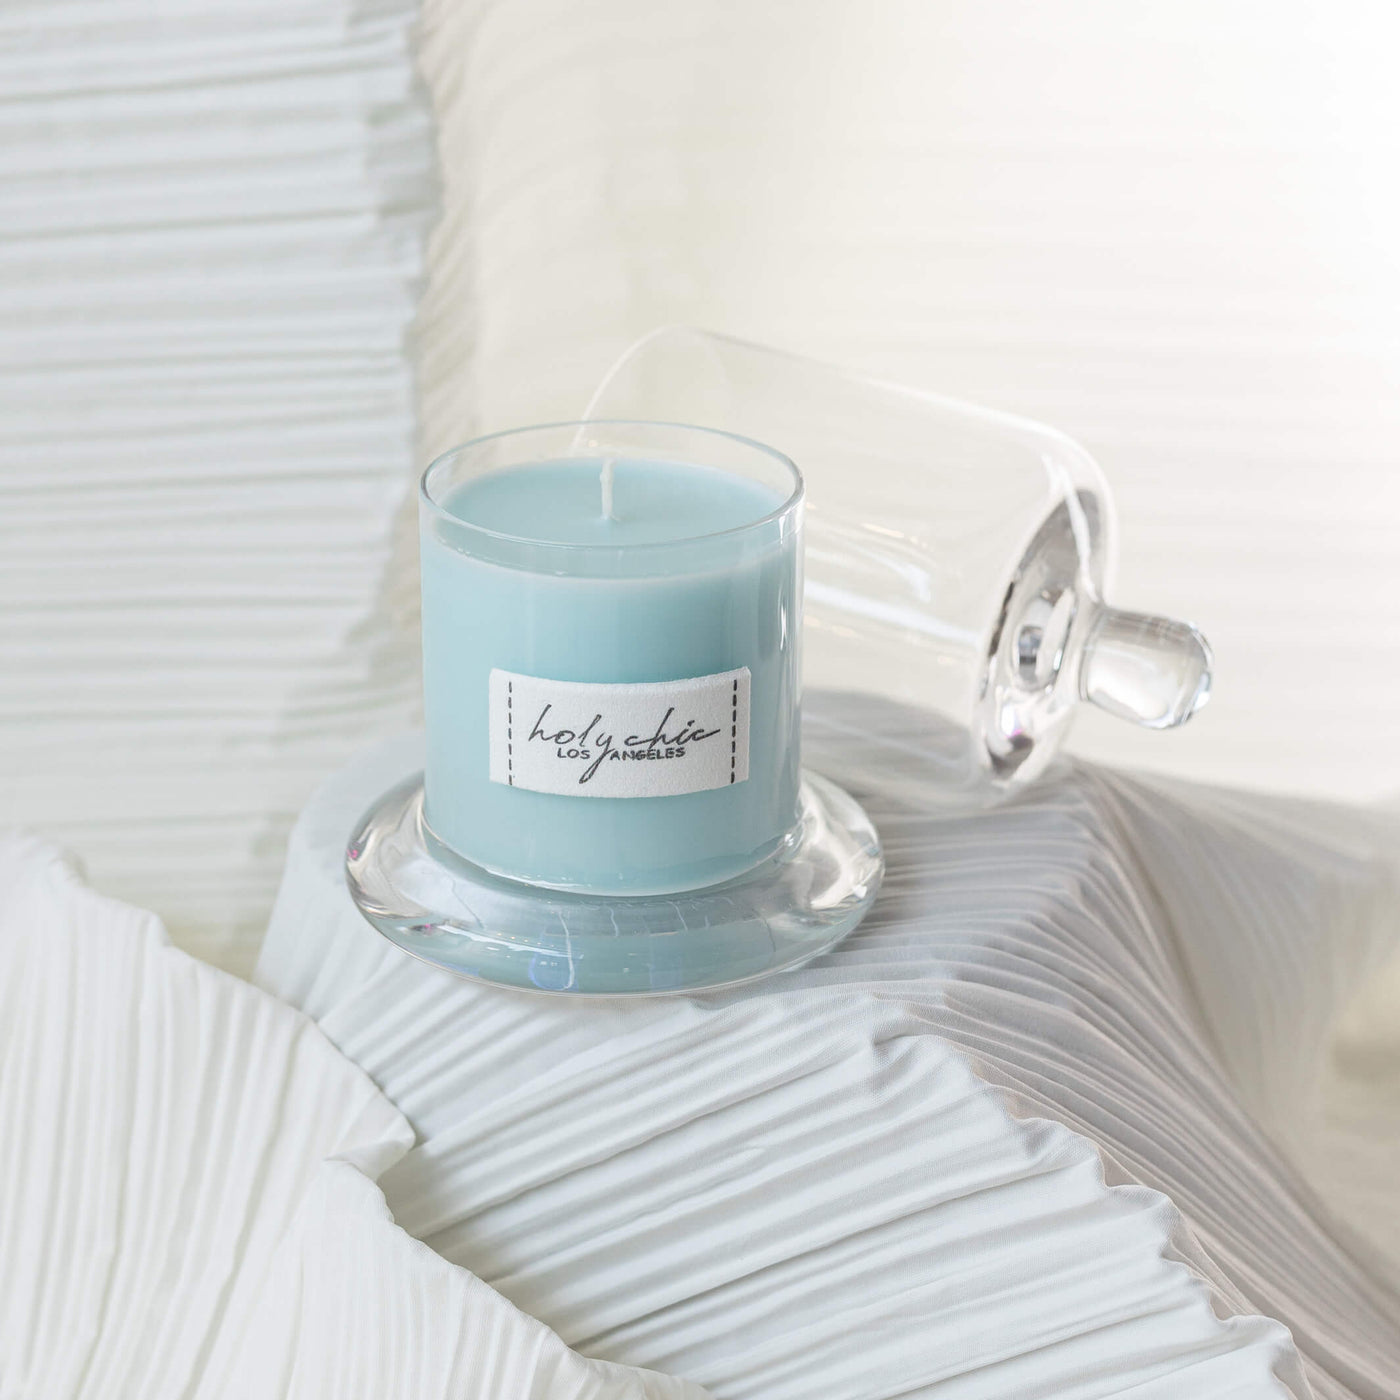 A scented candle in a light blue color